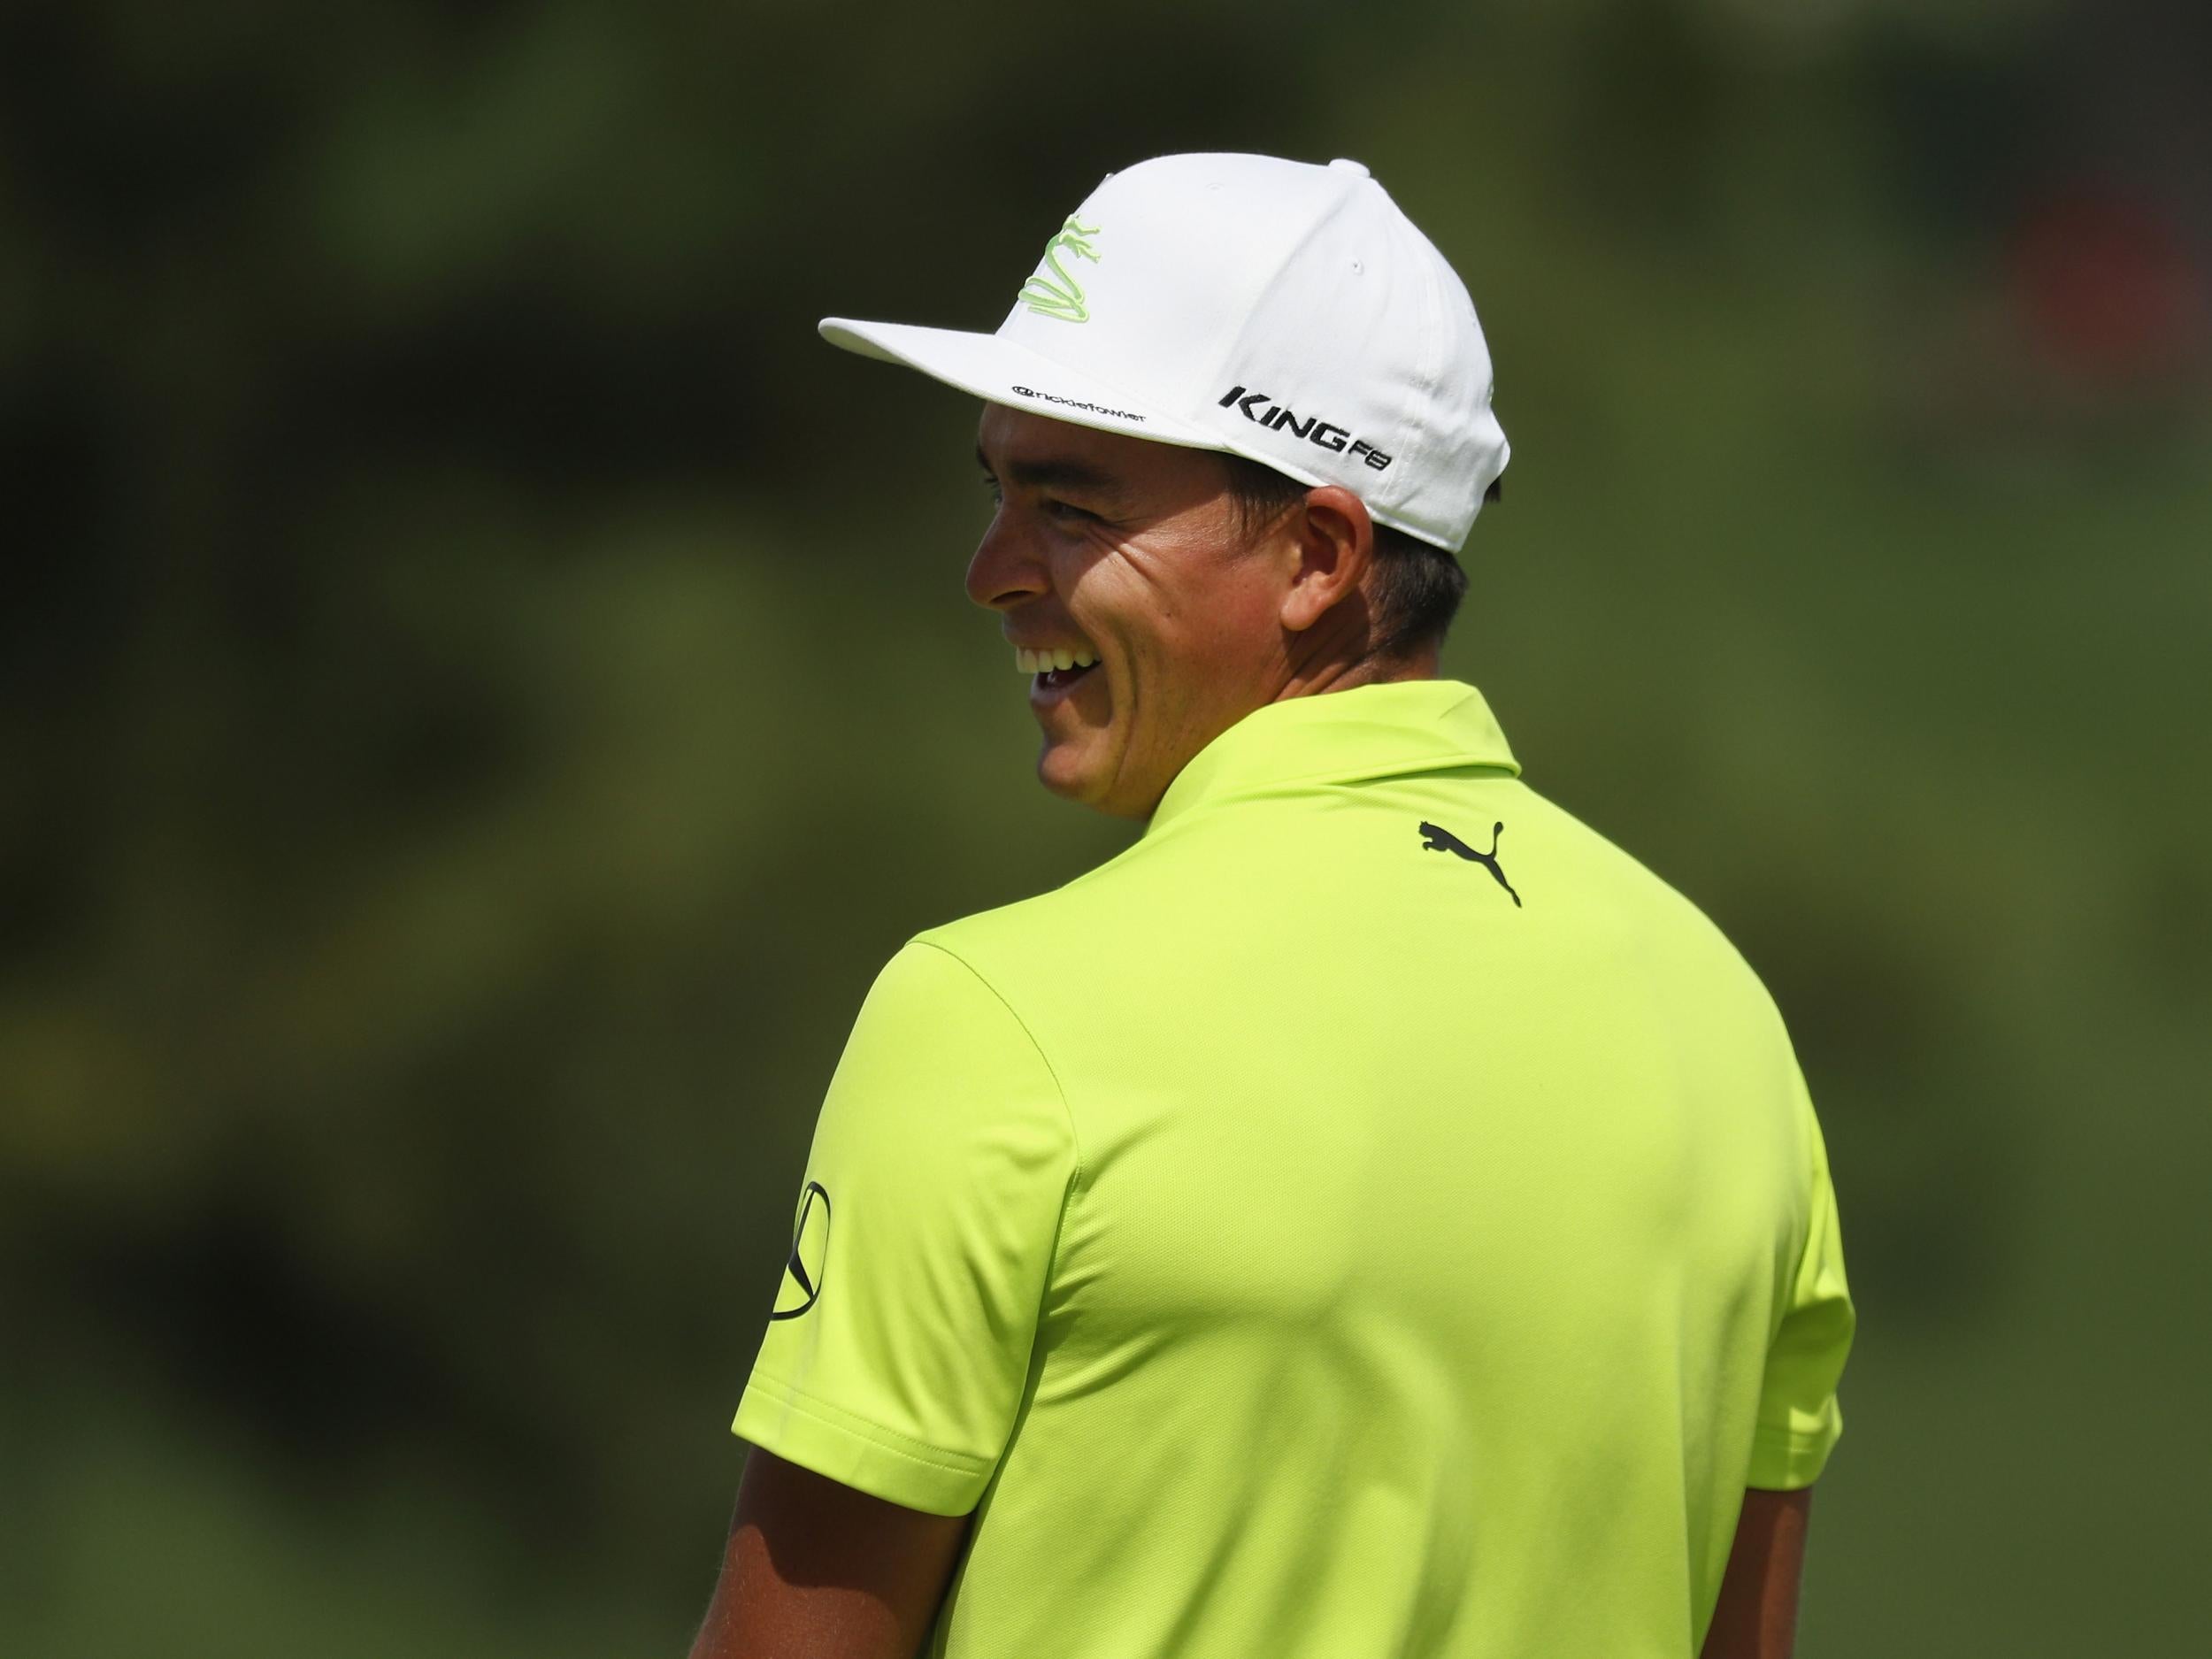 Rickie Fowler is in confident mood heading into Masters week